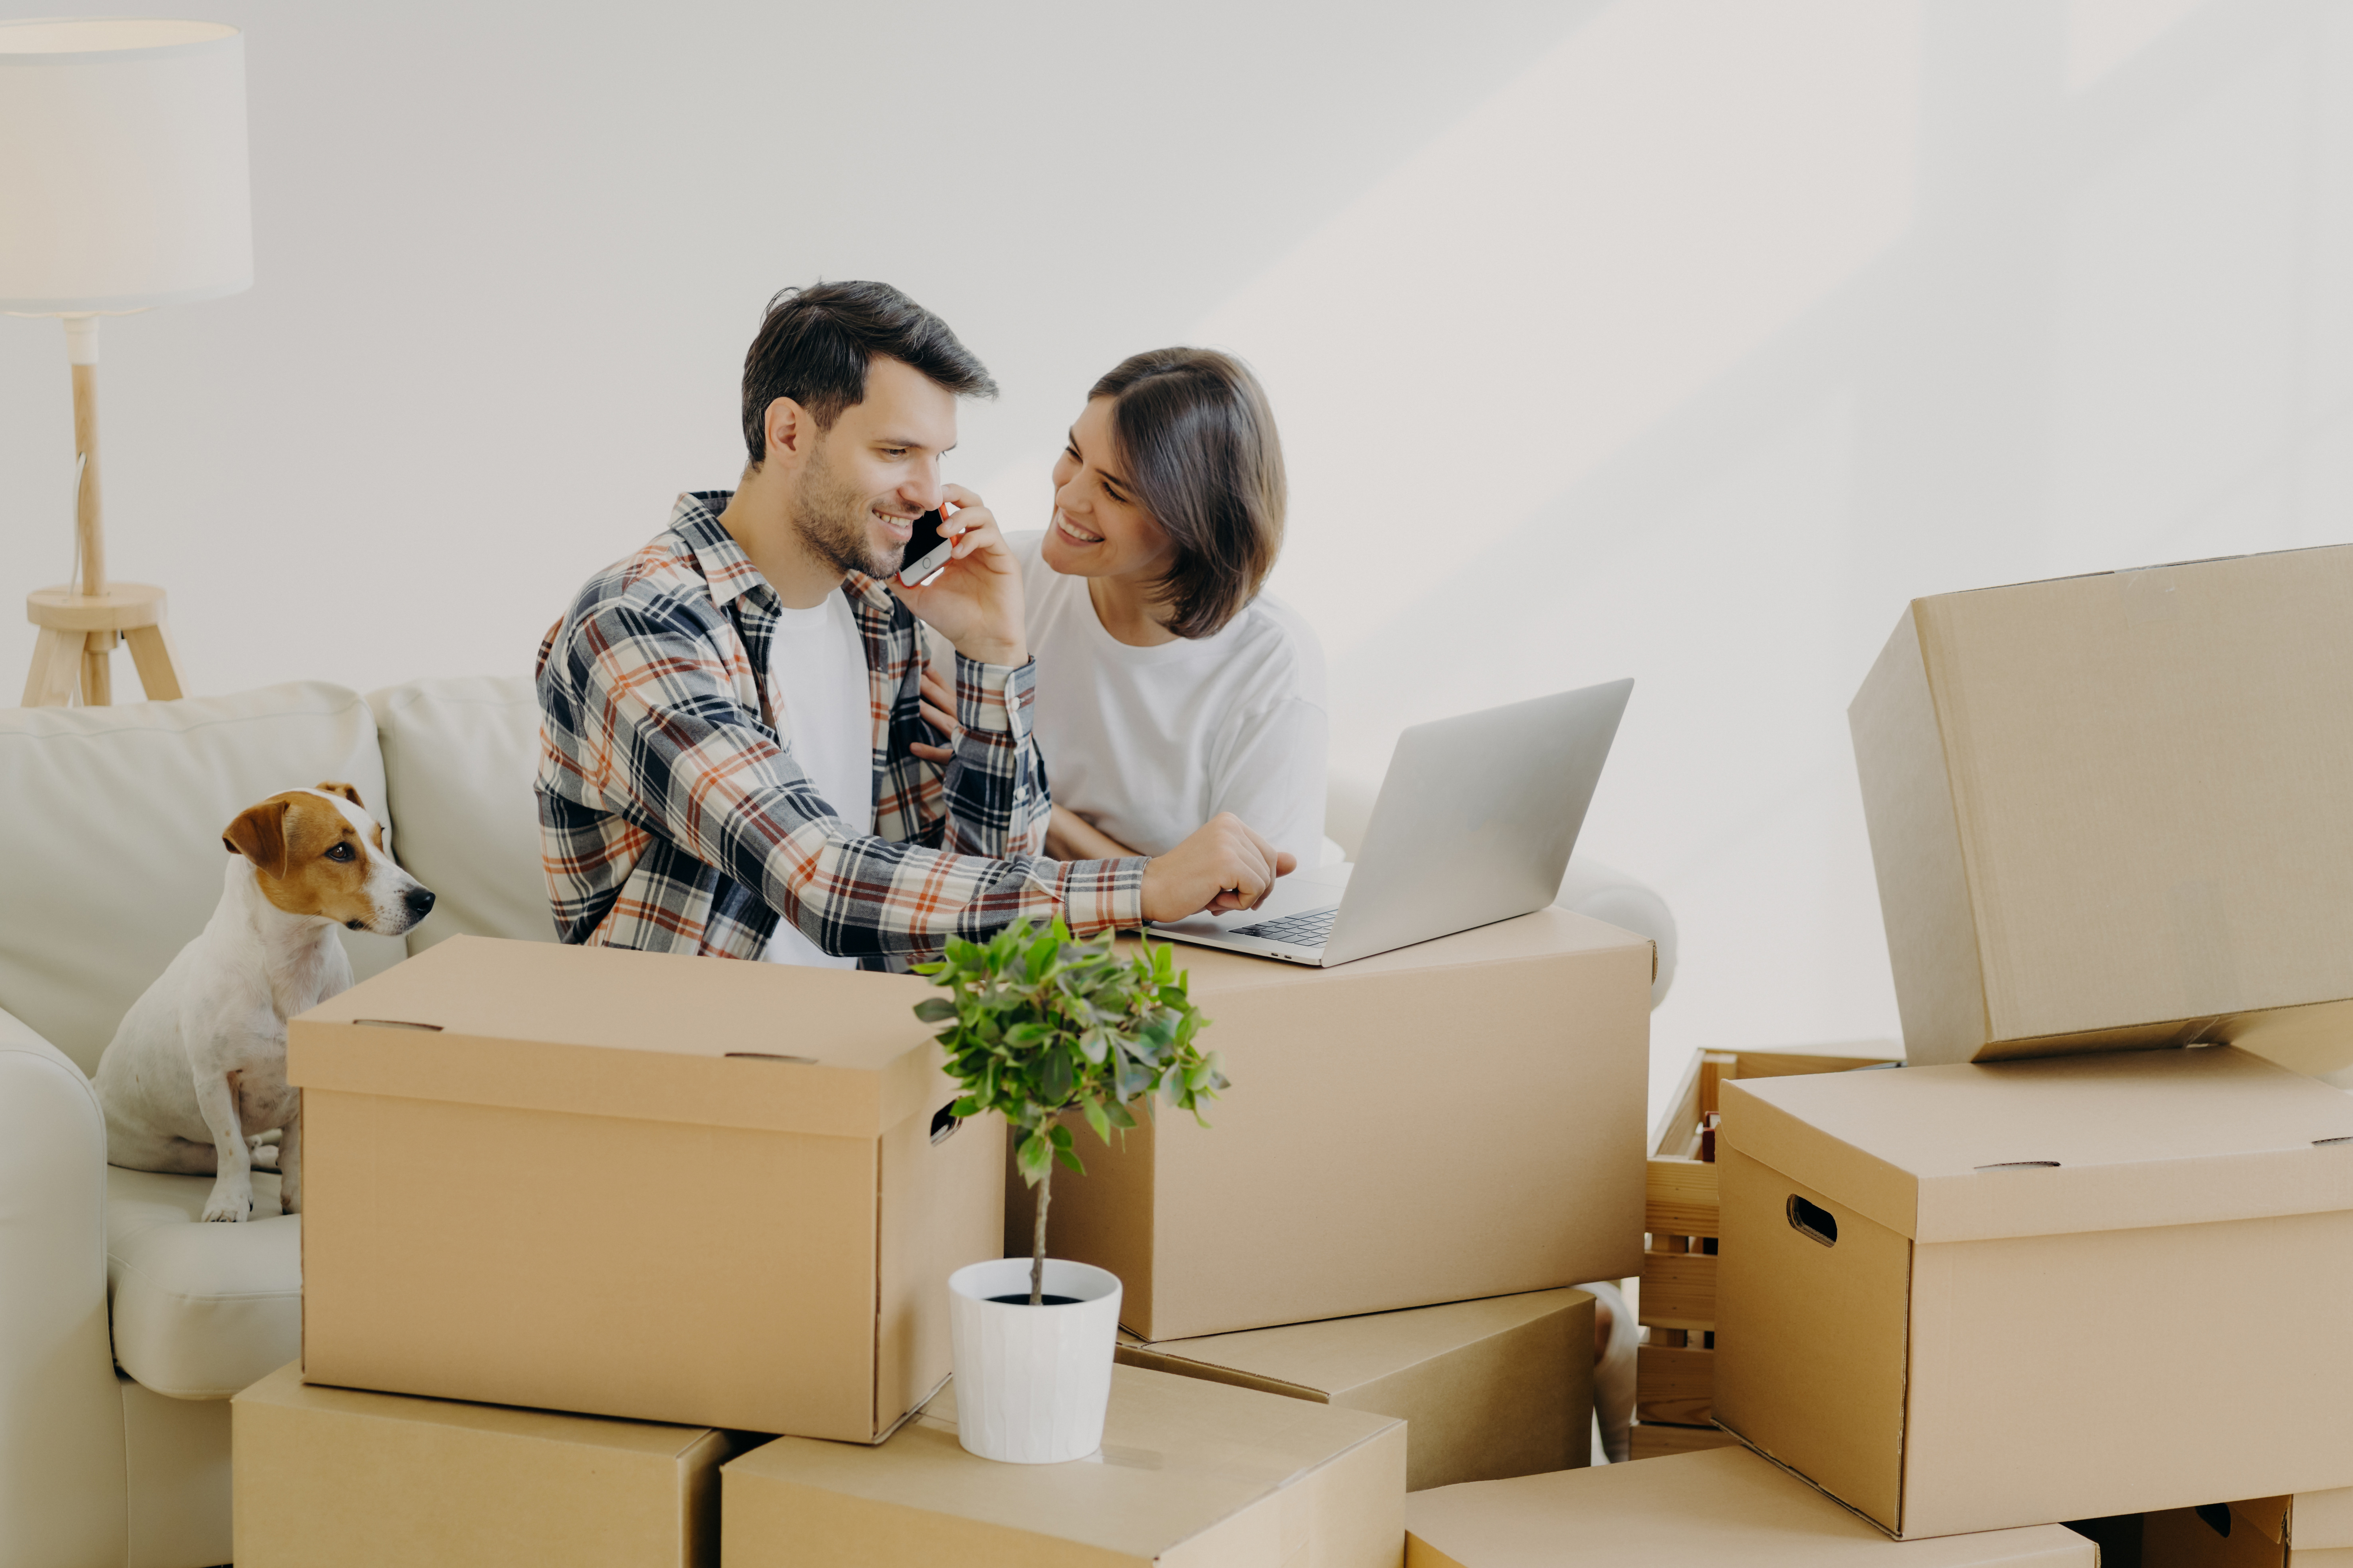 husband and wife move in new bought house, buy furniture online, use modern technology